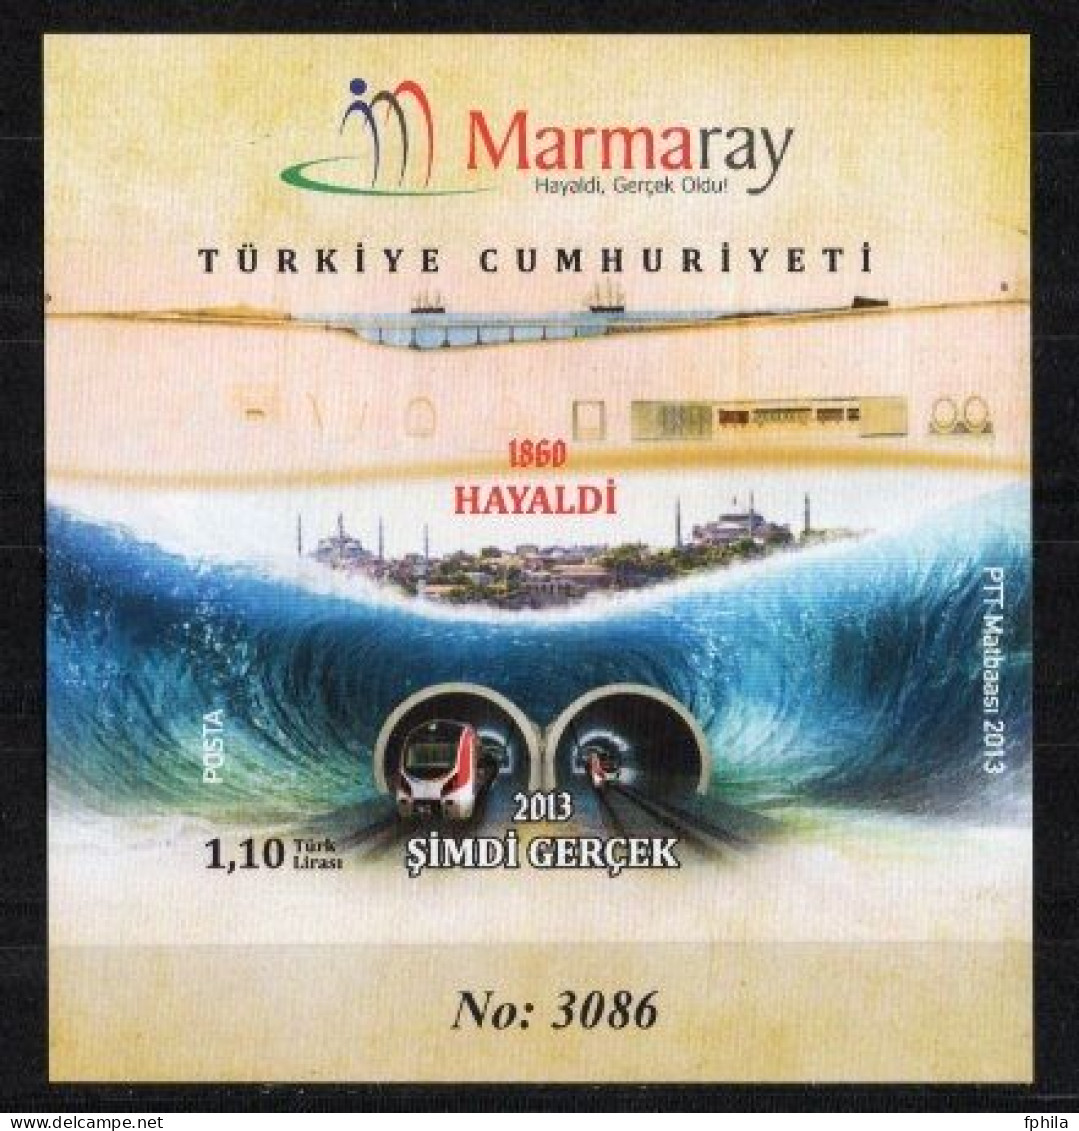 2013 TURKEY MARMARAY WAS ONCE A DREAM, NOW IT'S REALITY - TRAINS , SUBWAY IMPERFORATED SOUVENIR SHEET MNH ** - Blocks & Sheetlets